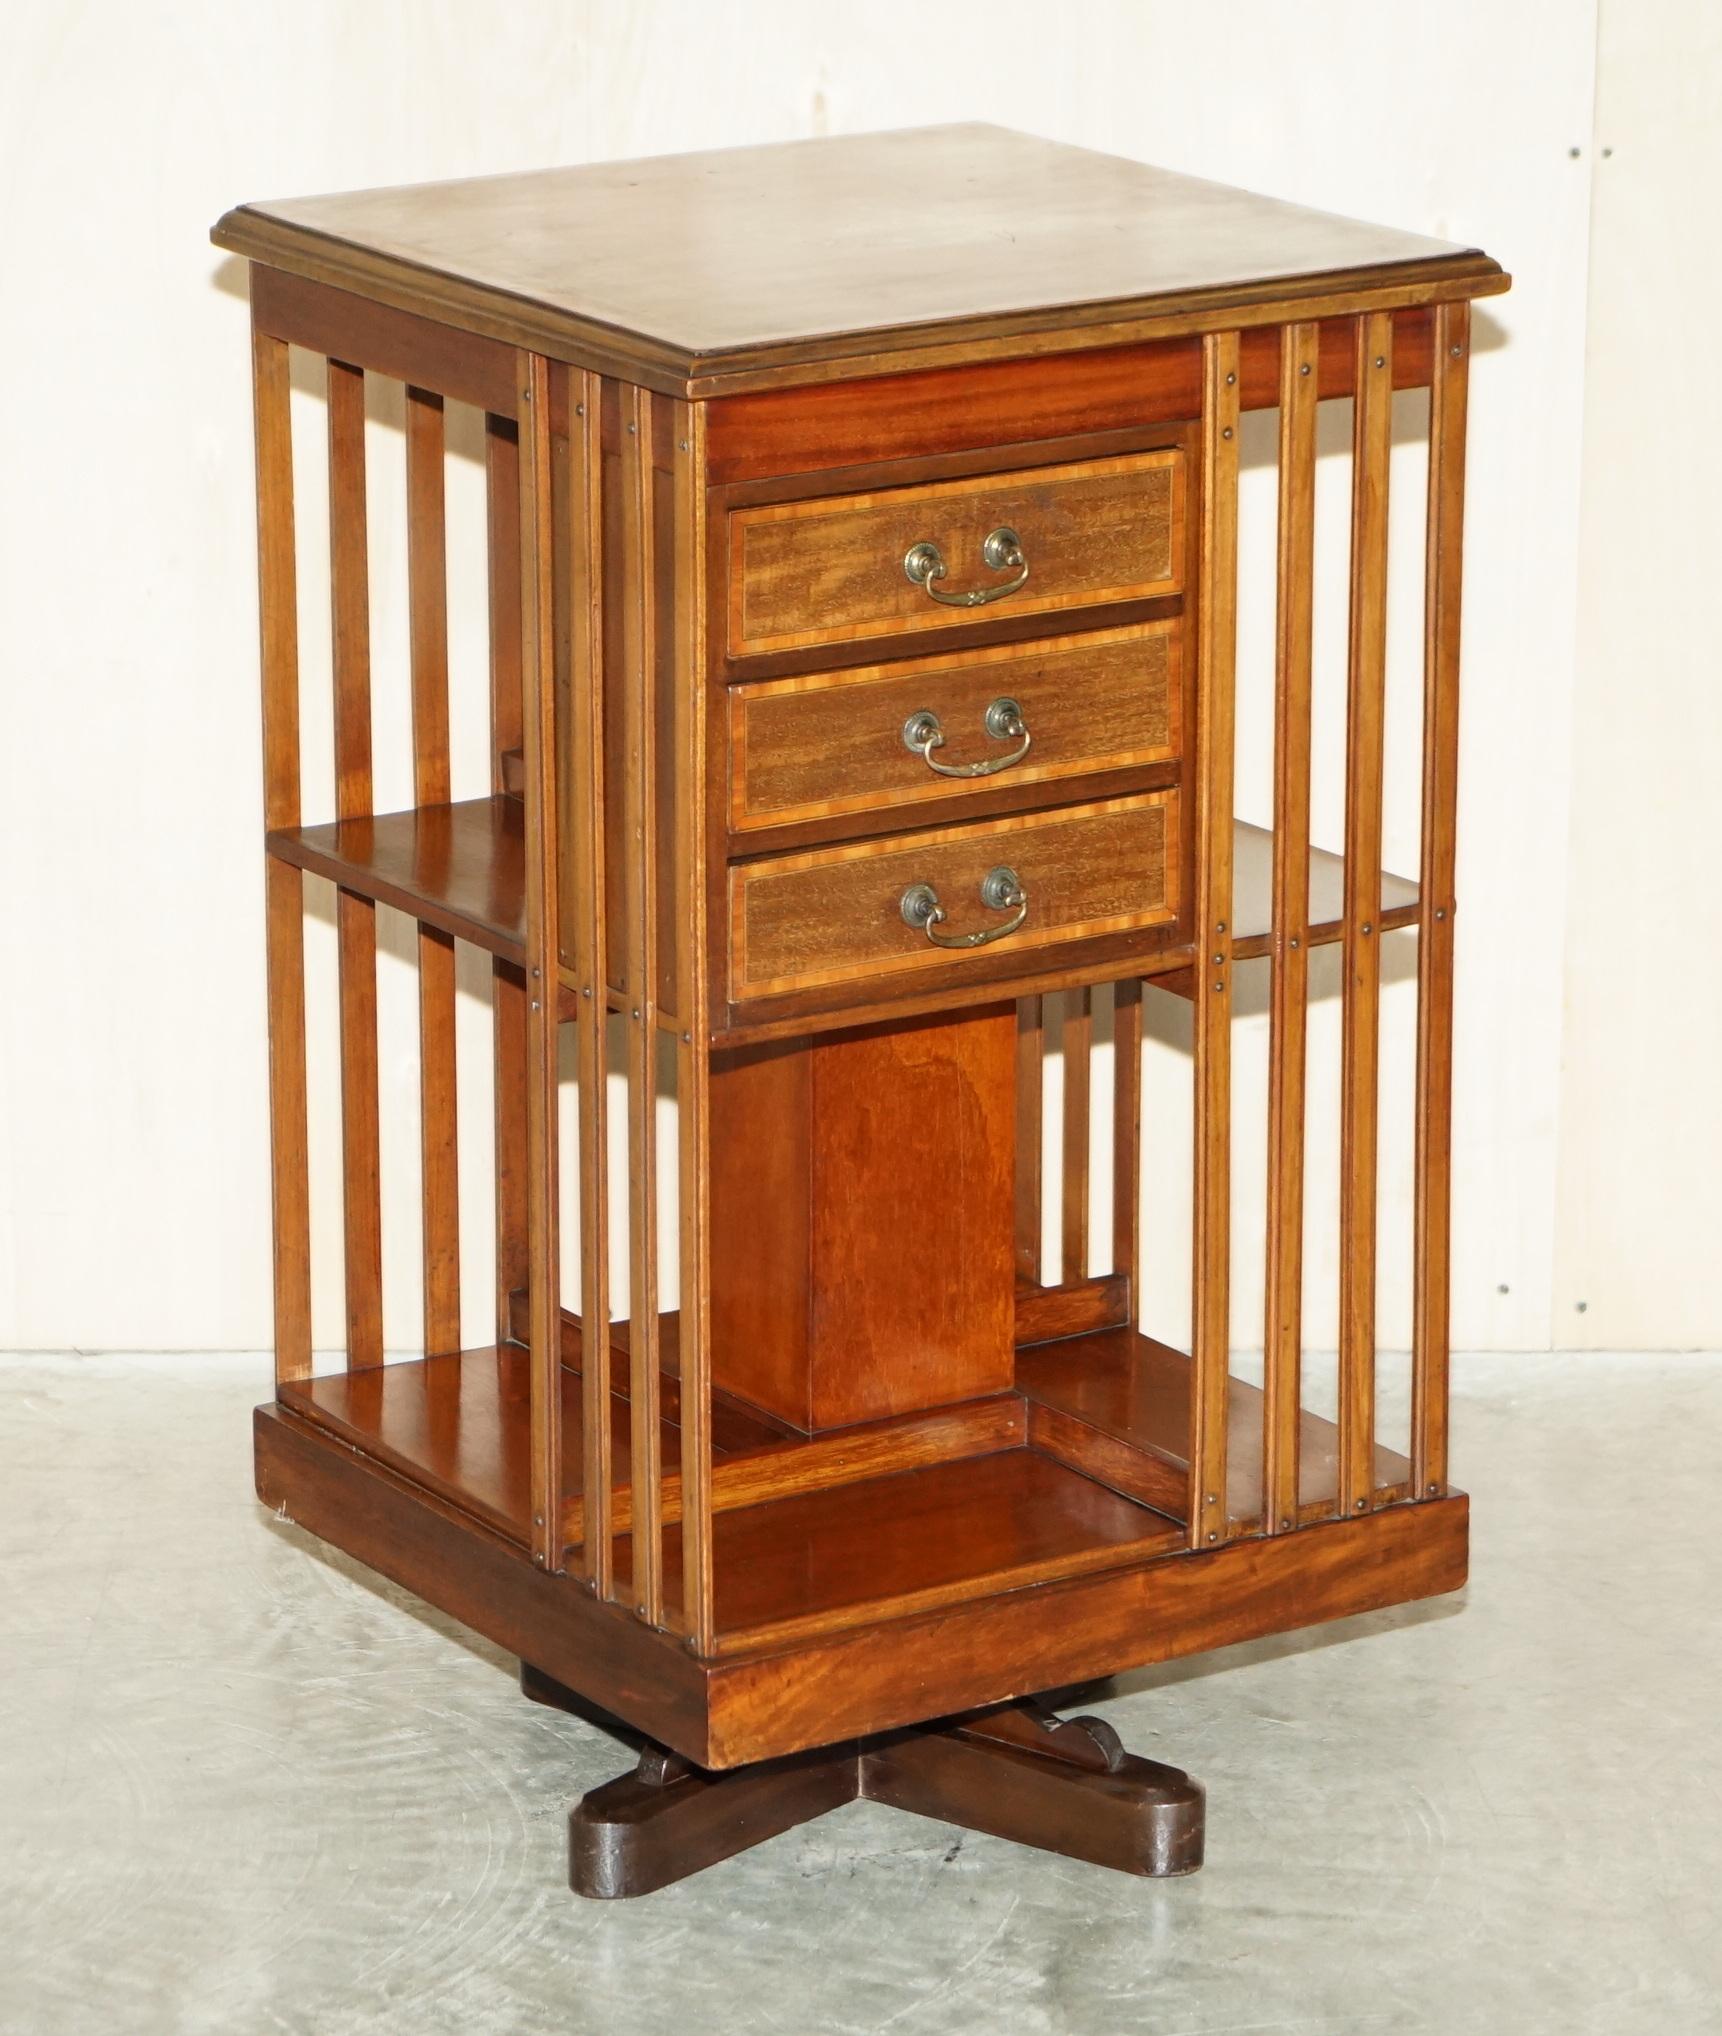 We are delighted to offer for sale this exhibition quality English Walnut with Satinwood inlay, circa 1880 revolving bookcase table with exquisitely finished top and very rare small drawer section.

A good looking and well made piece, this is the